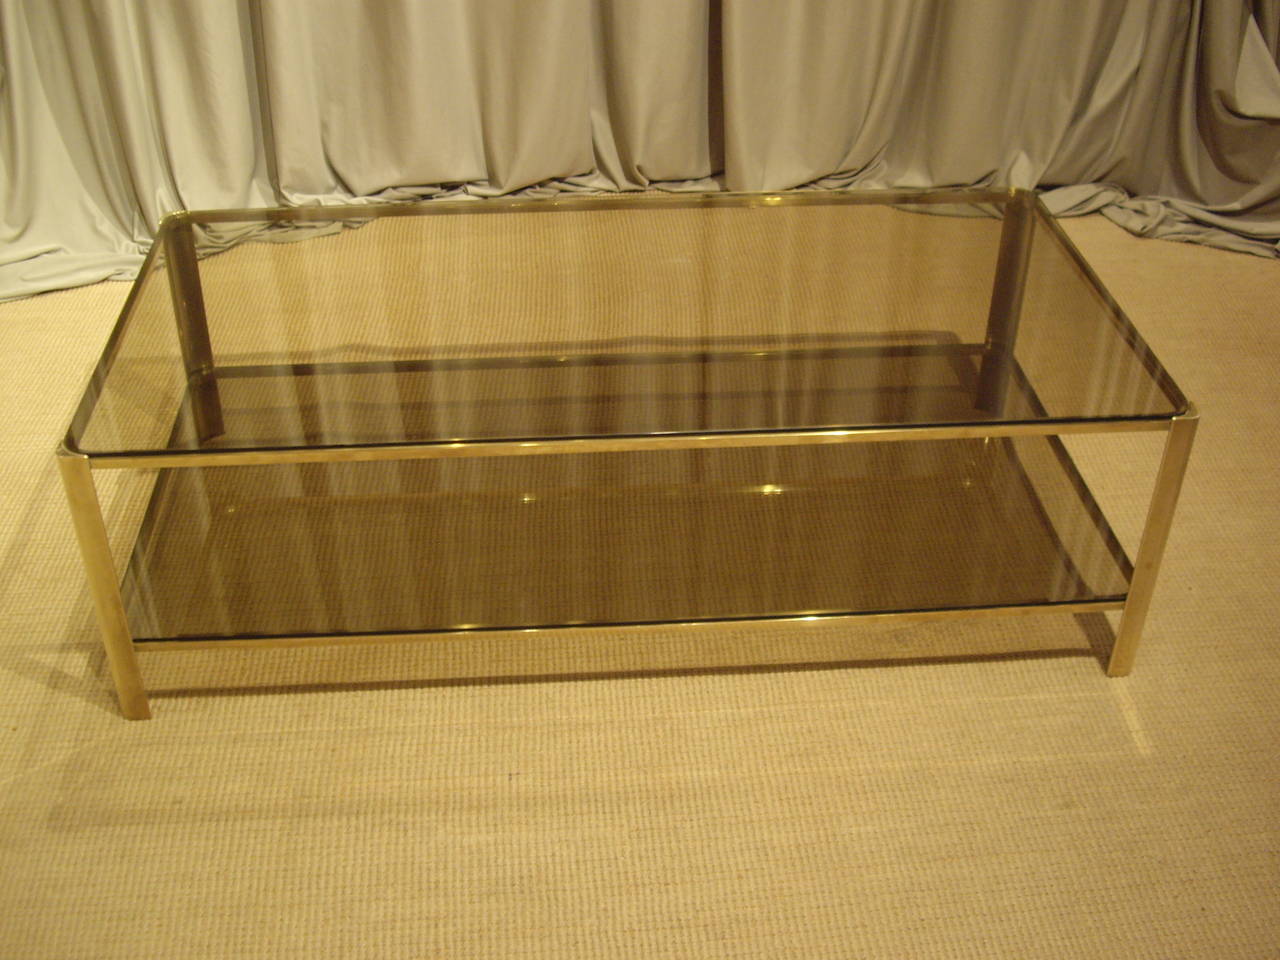 Jacques Quinet designed 1950's bronze coffee table. Smoked glass top and shelf.